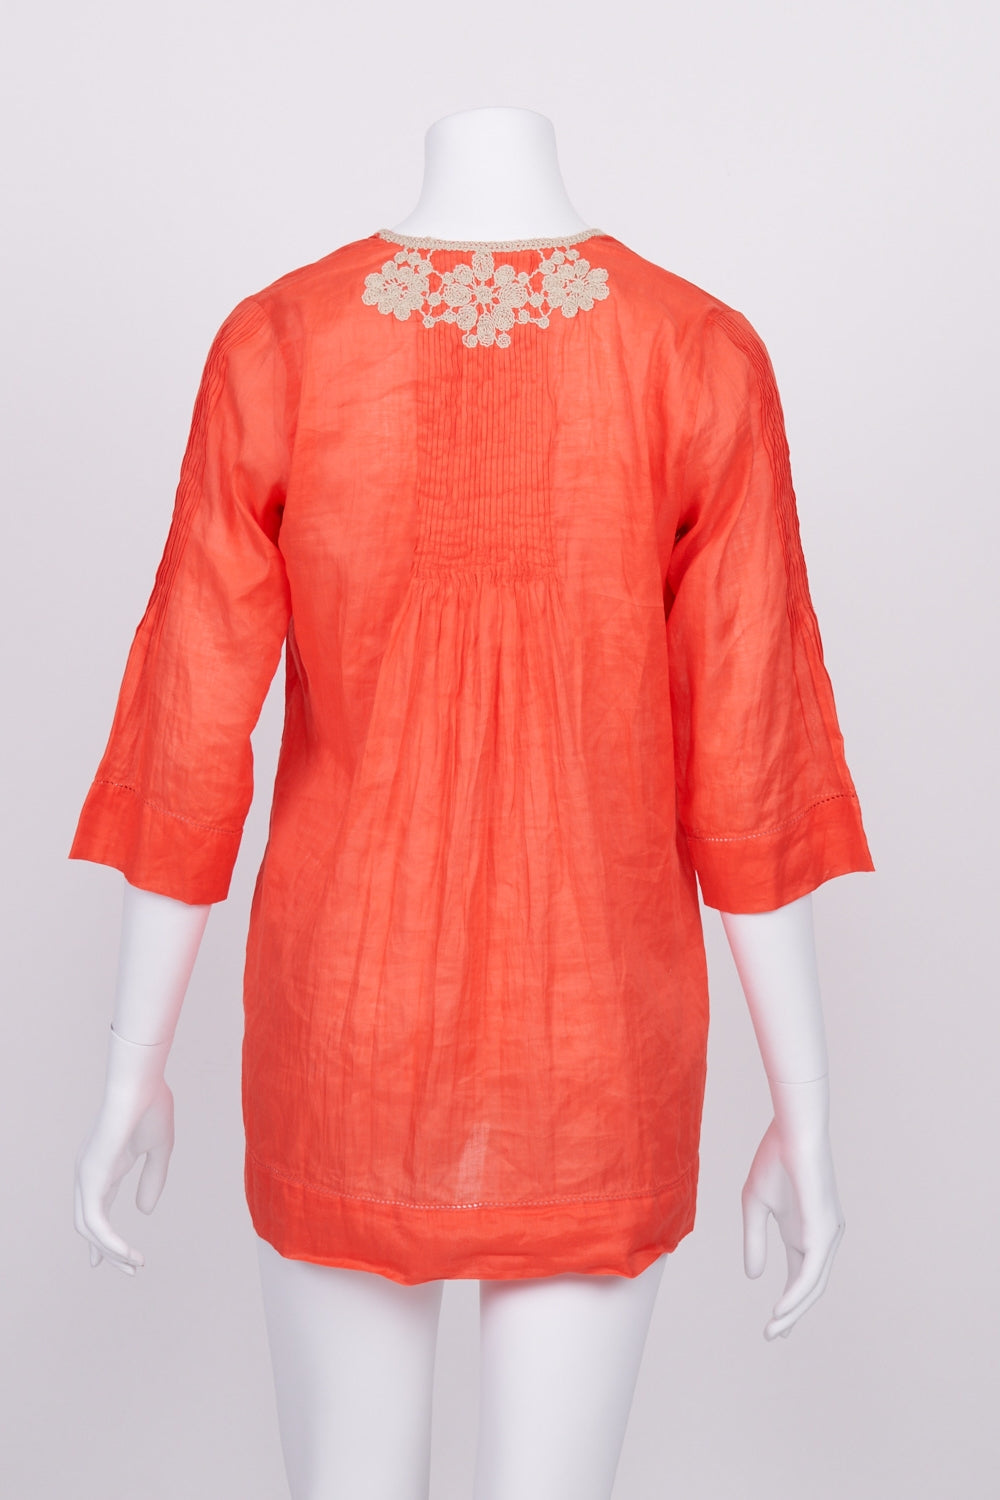 Verge Embroidered Coral Pintuck Top S